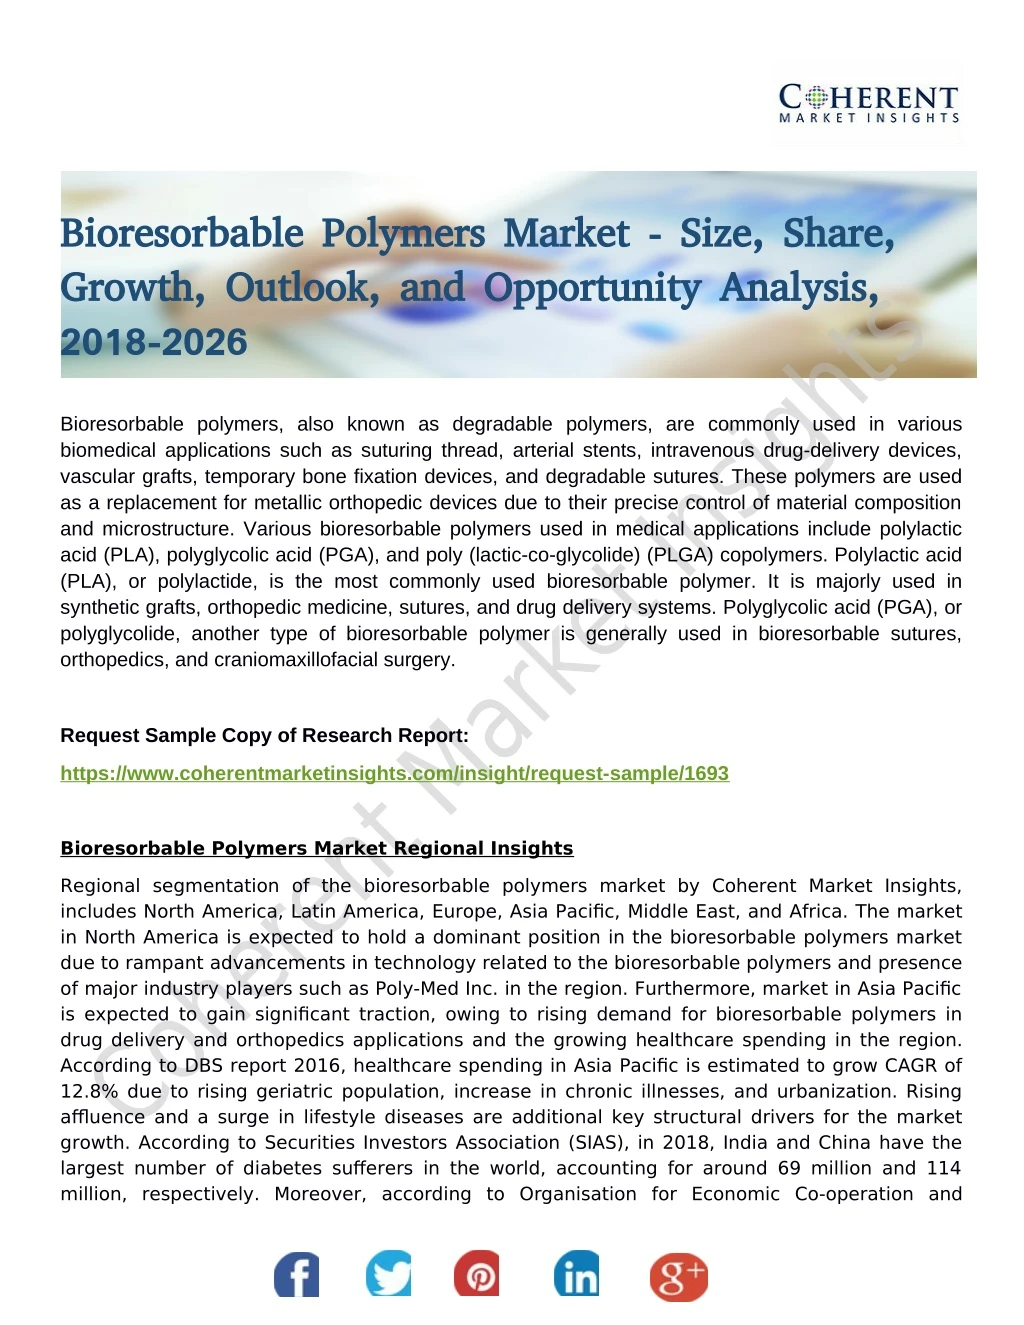 bioresorbable polymers market size share